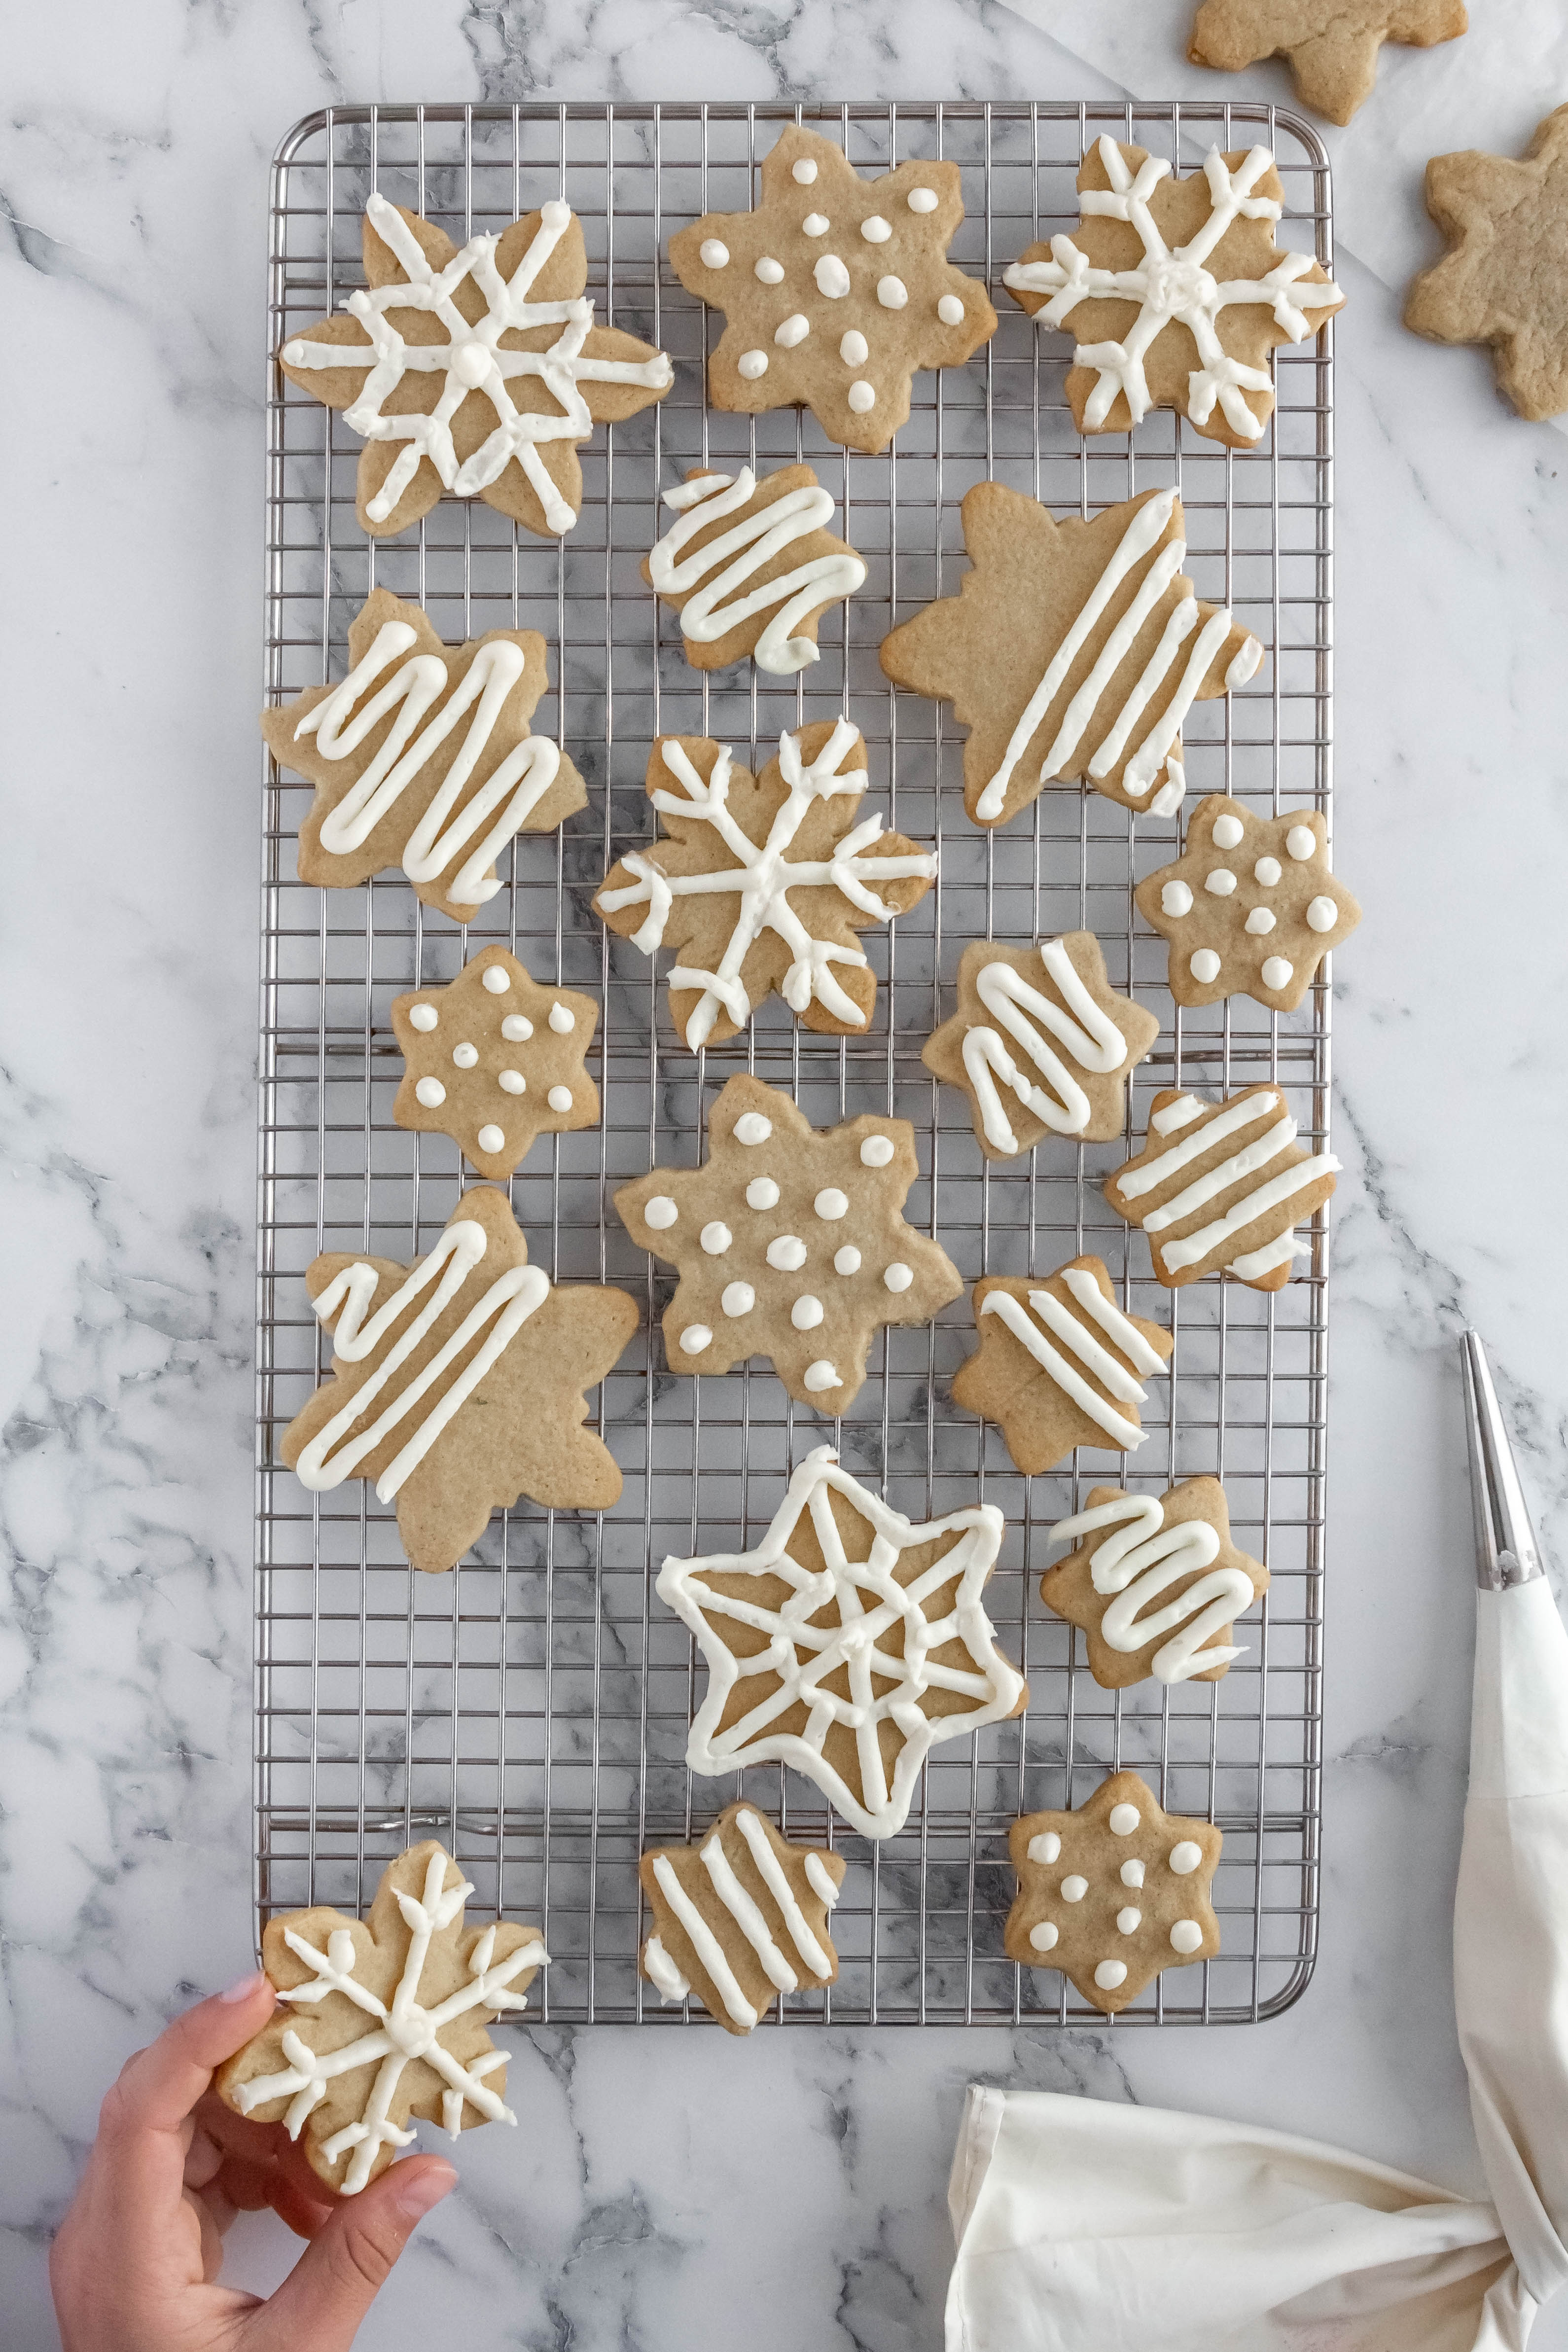 Maple Sugar Cookies Recipe - Cashmere and Cocktails